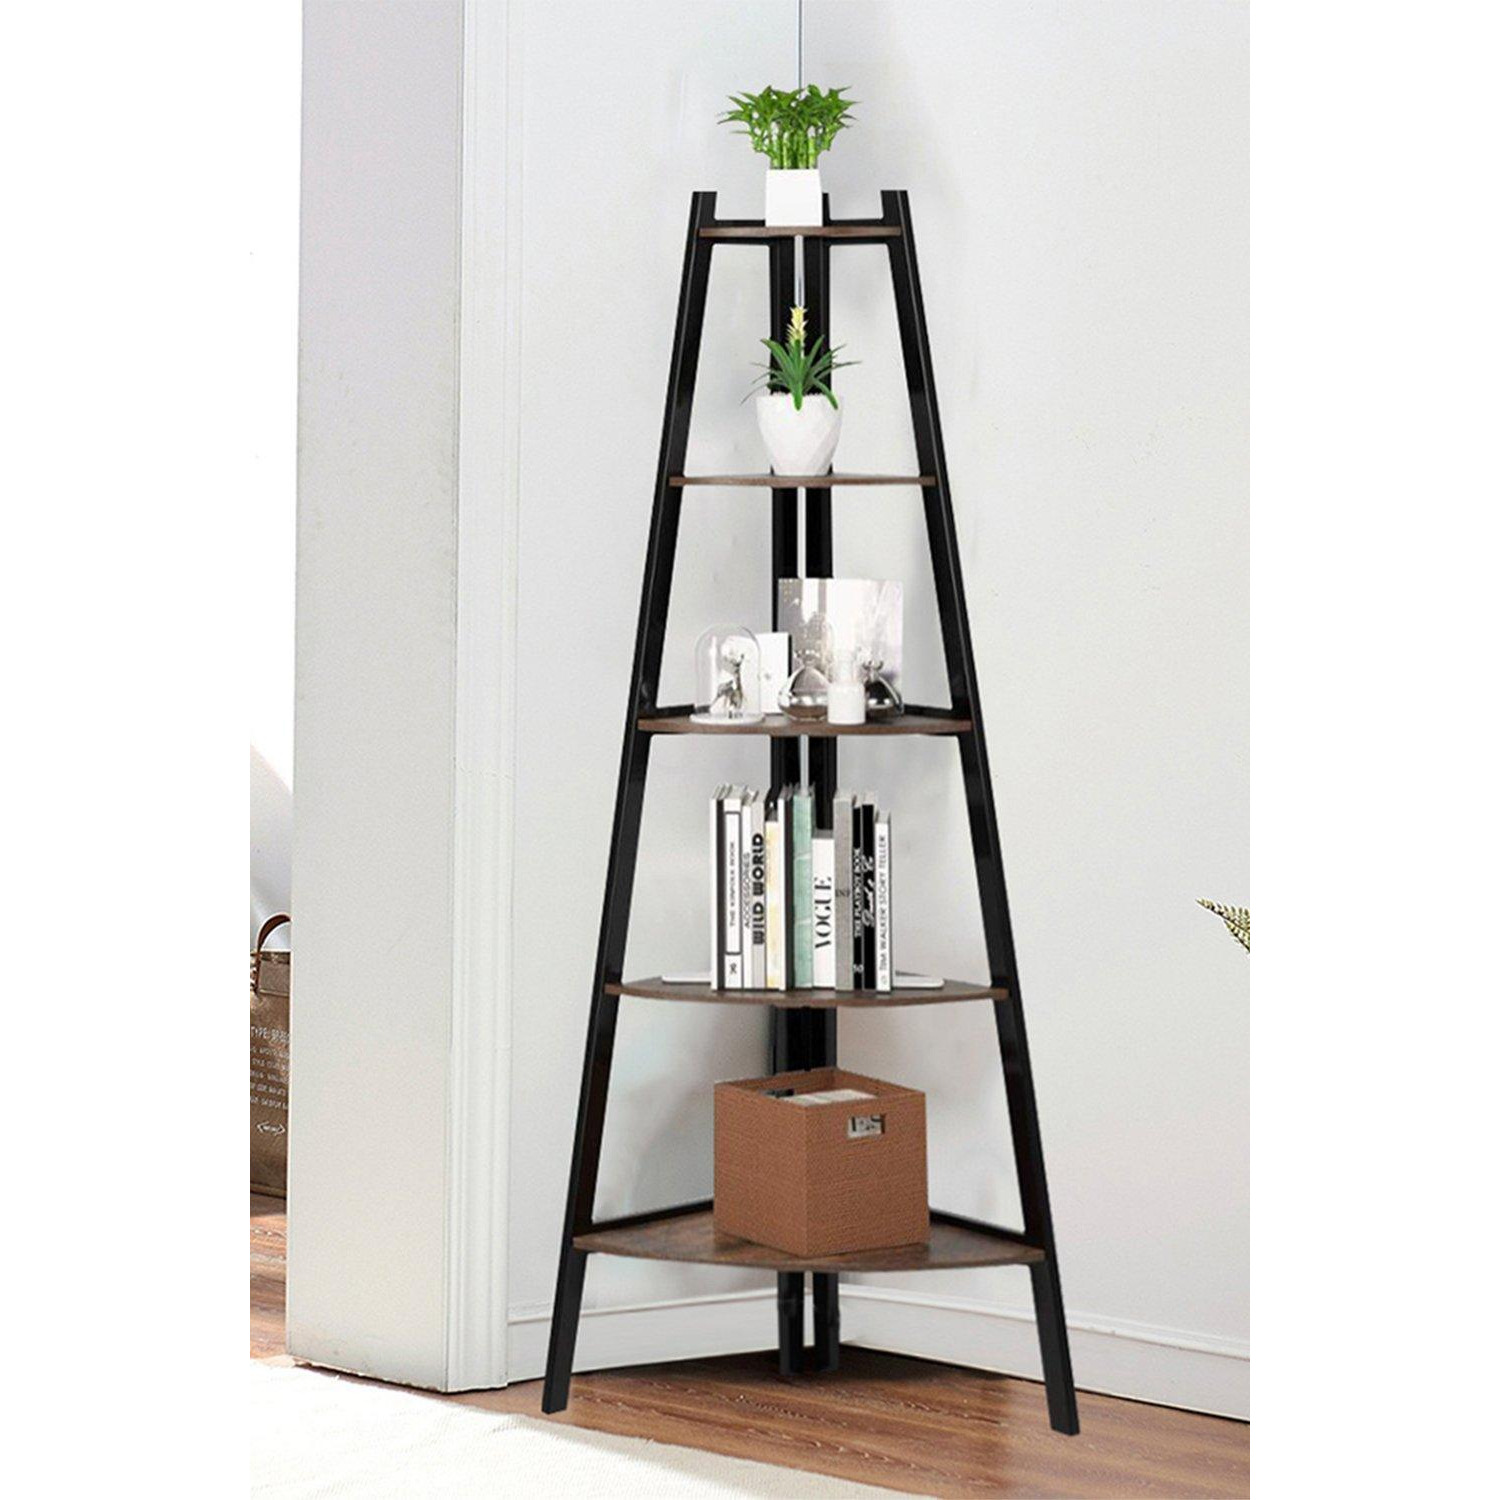 5 Tier Vintage Tiered Plant Stand - image 1